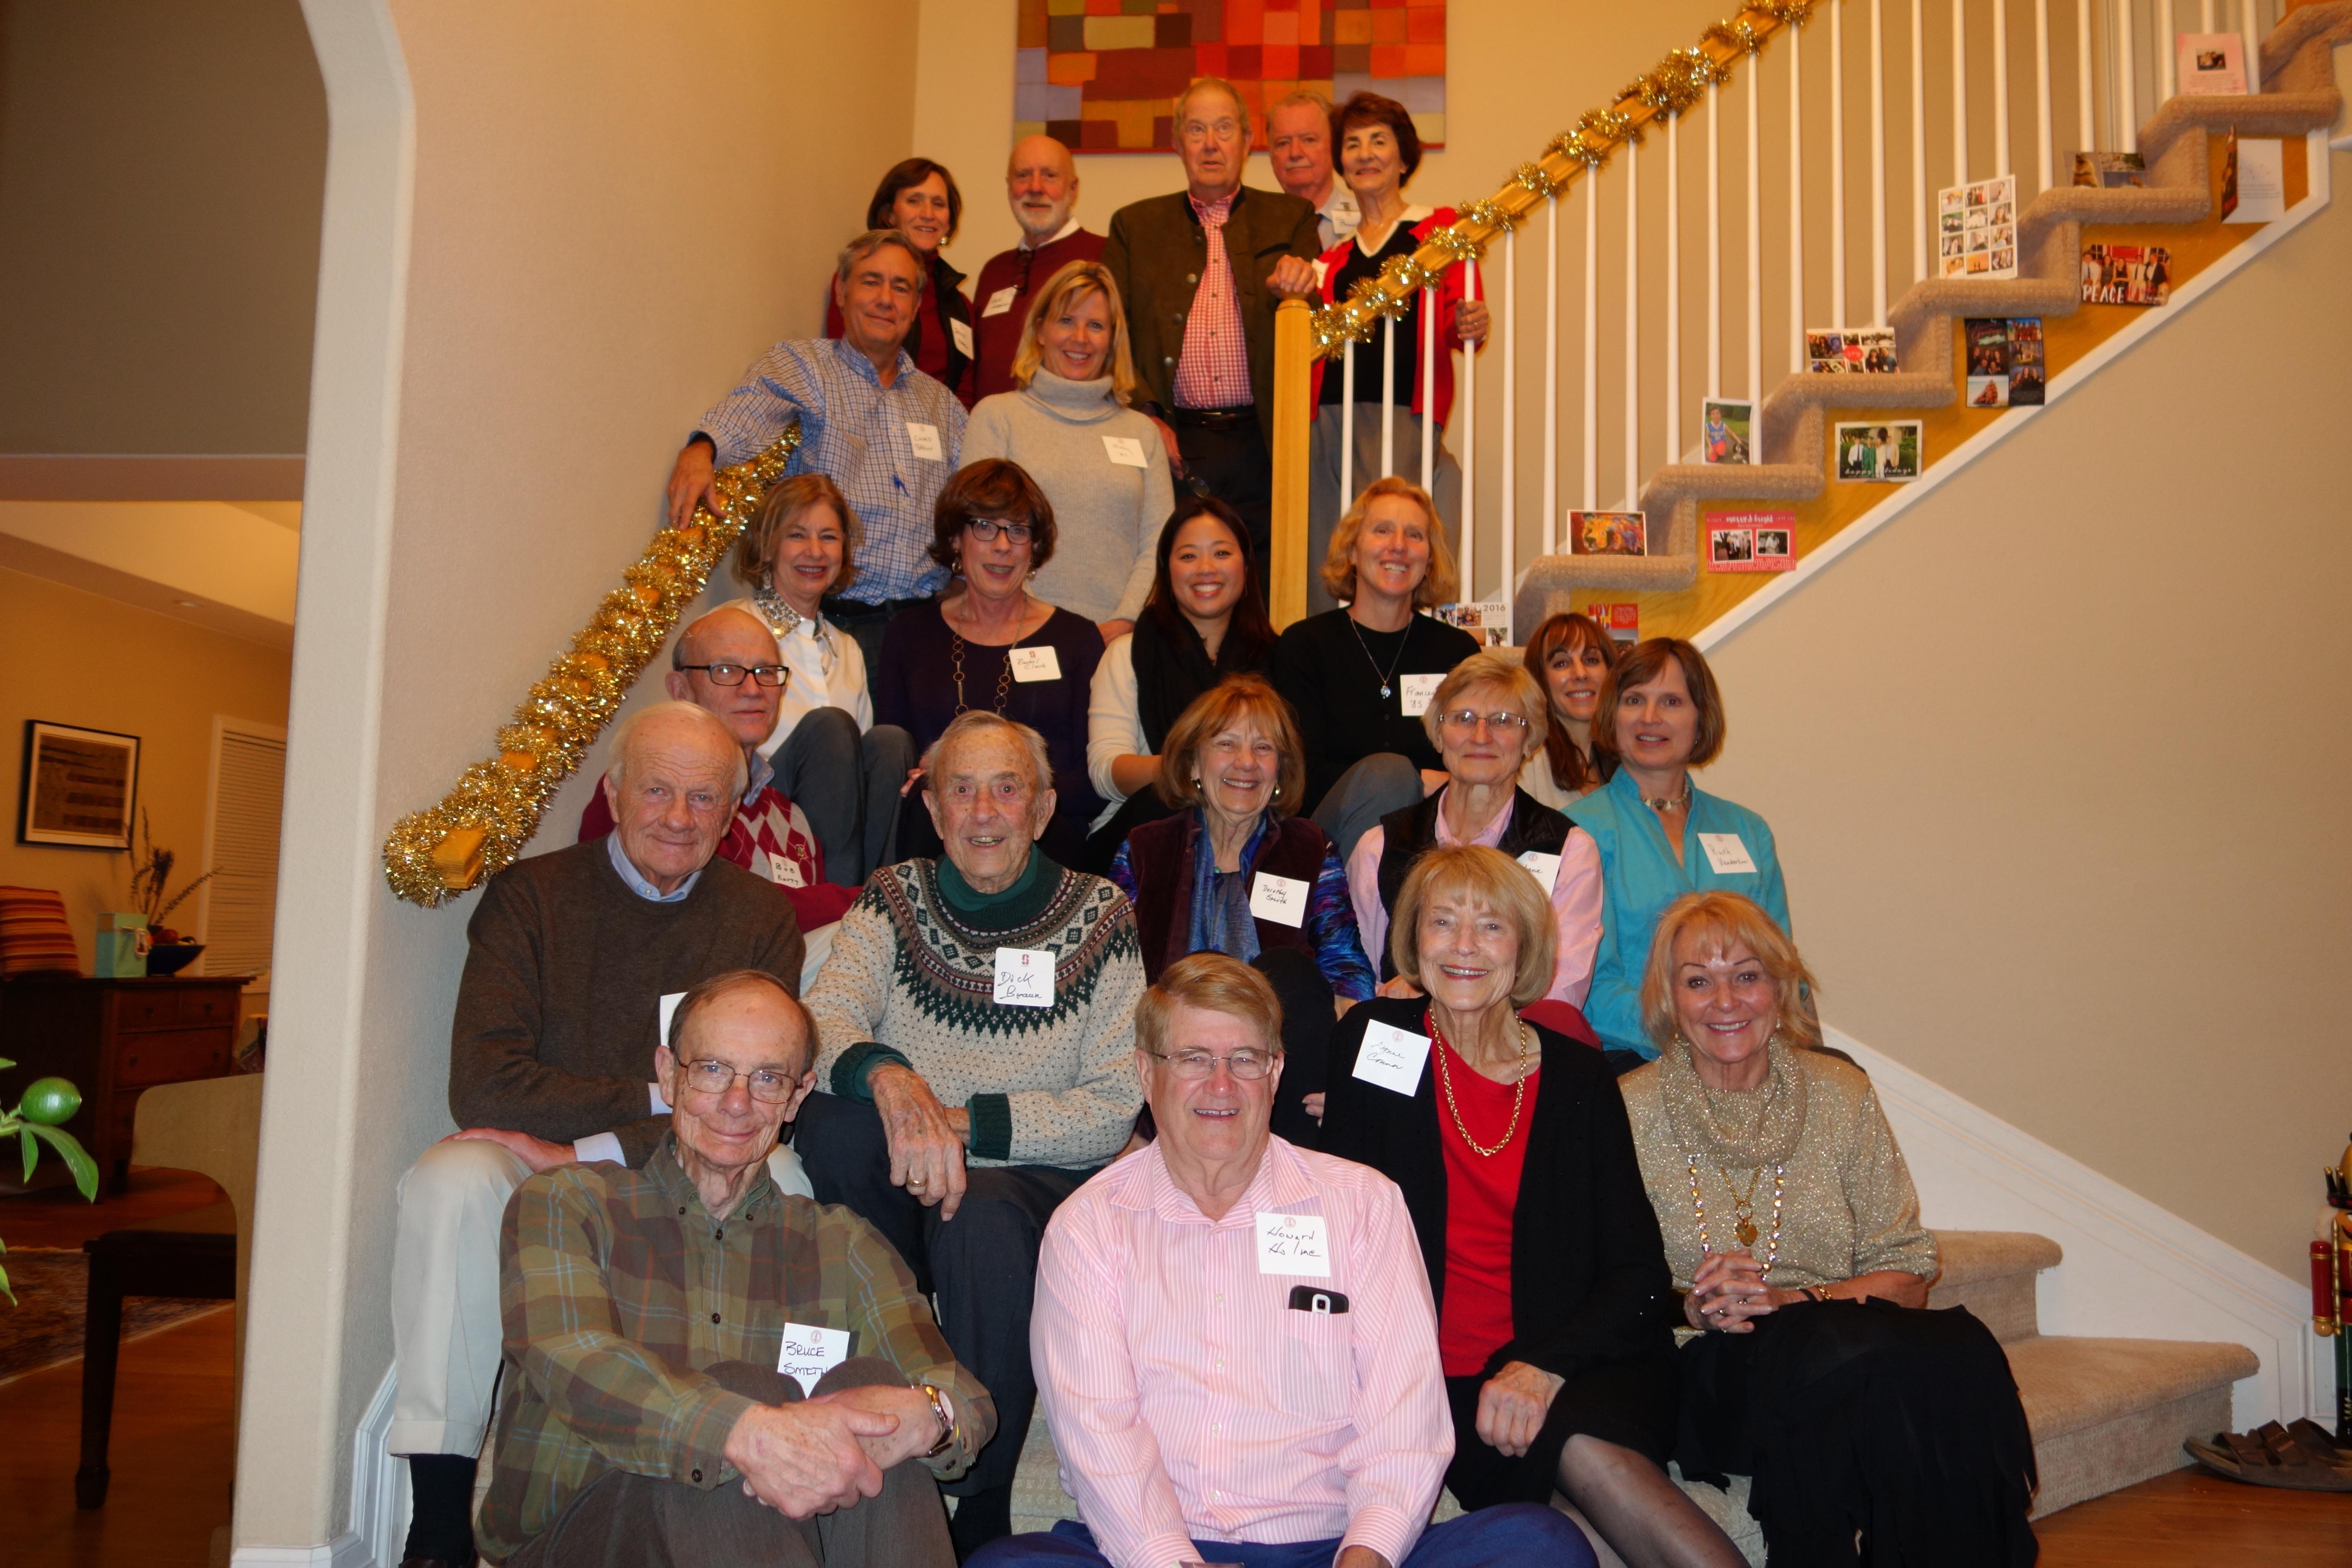 Bob K. (left center) & his book club gather for annual book selection event